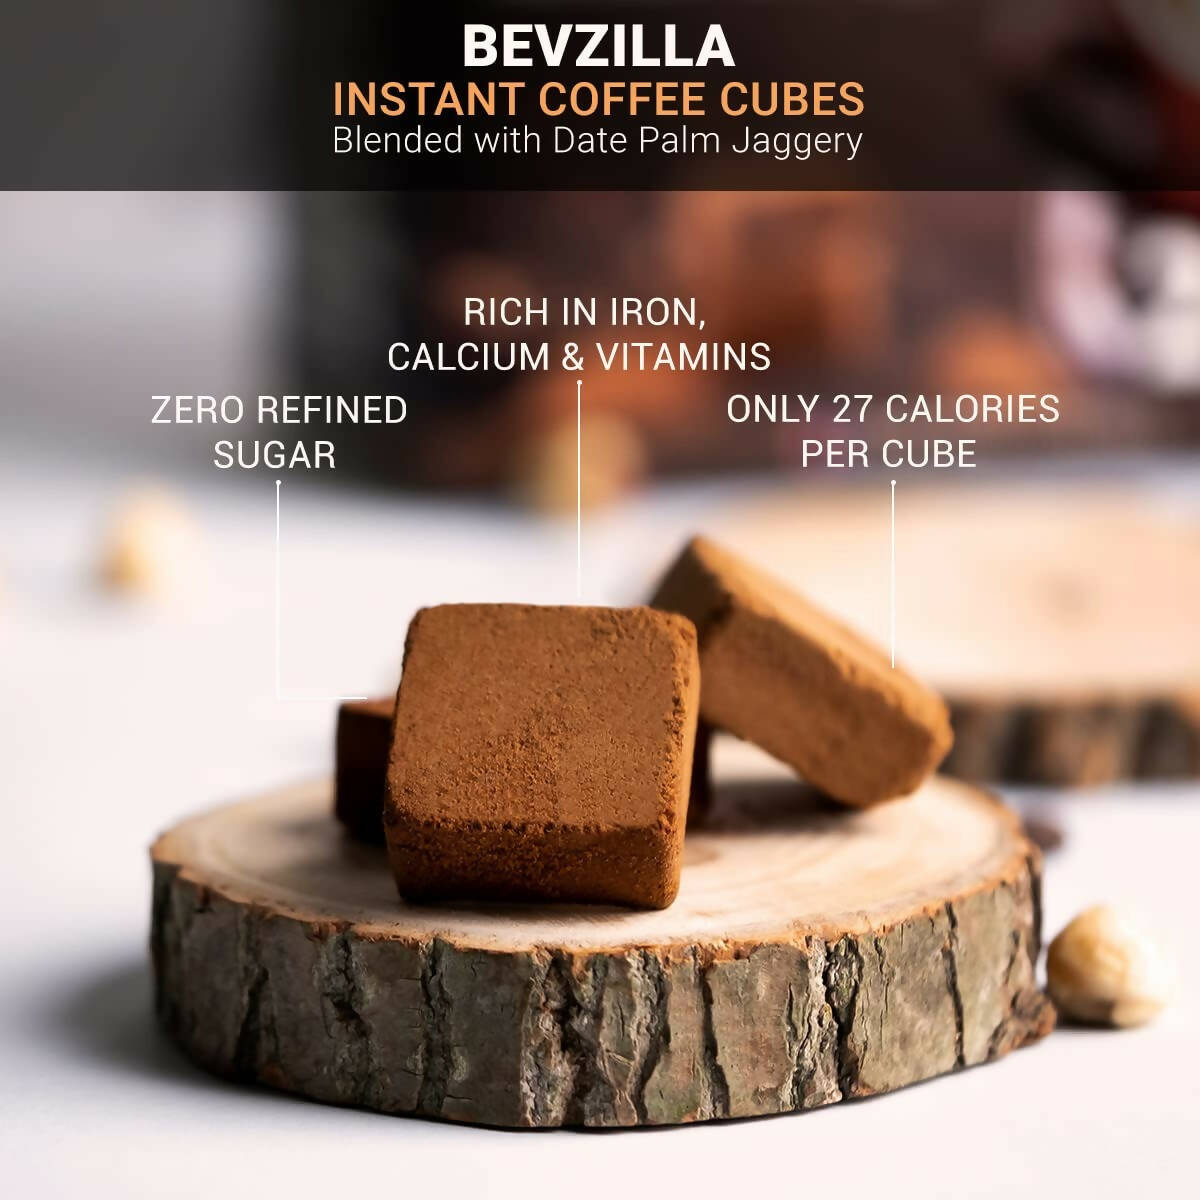 Bevzilla Instant Coffee Cubes Pack with Organic Date Palm Jaggery - Classic